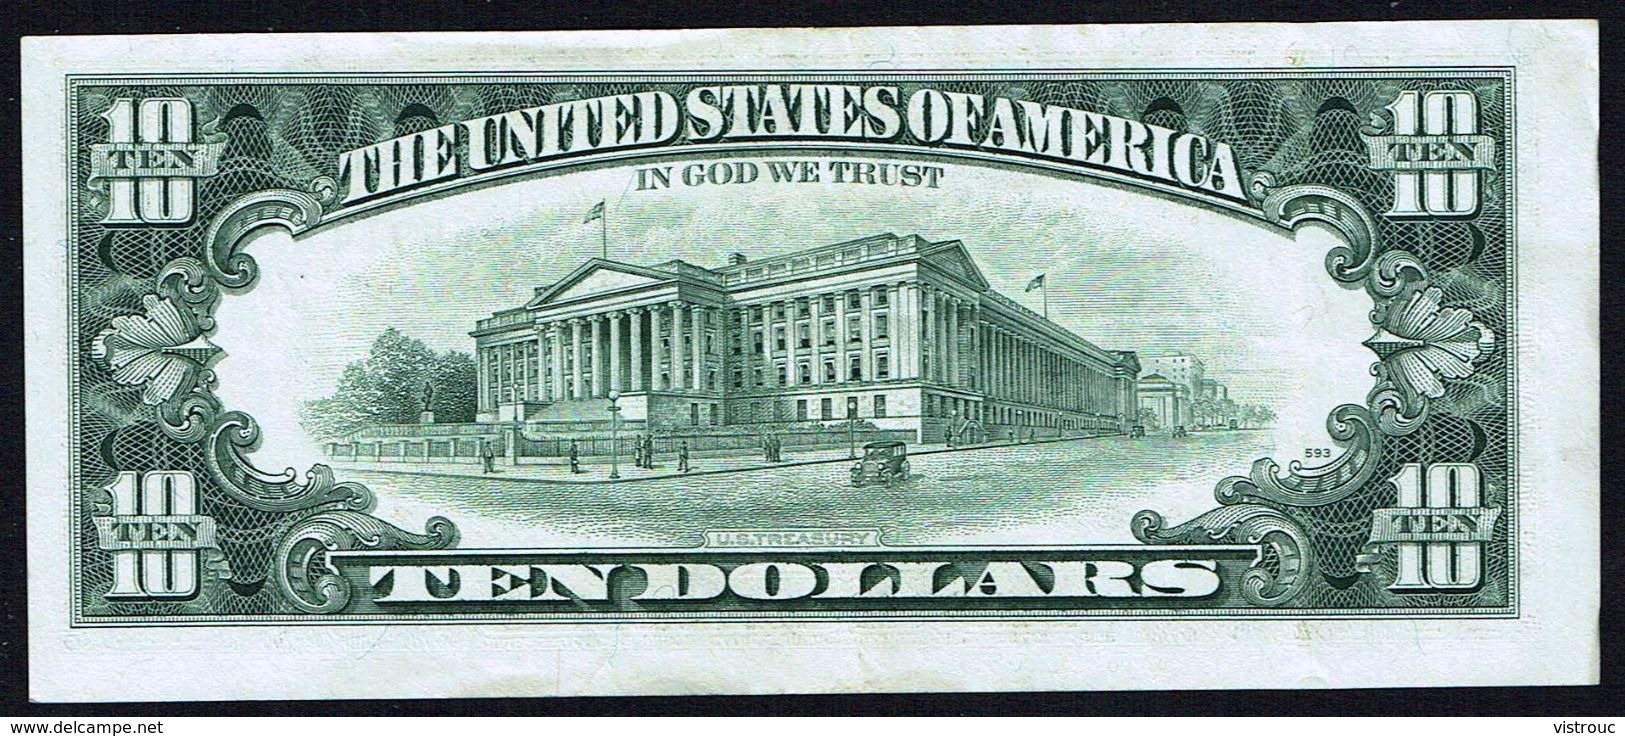 10 US DOLLARS - Series 1993 - N° G 89165914 A - F 22 - USED. - Federal Reserve Notes (1928-...)